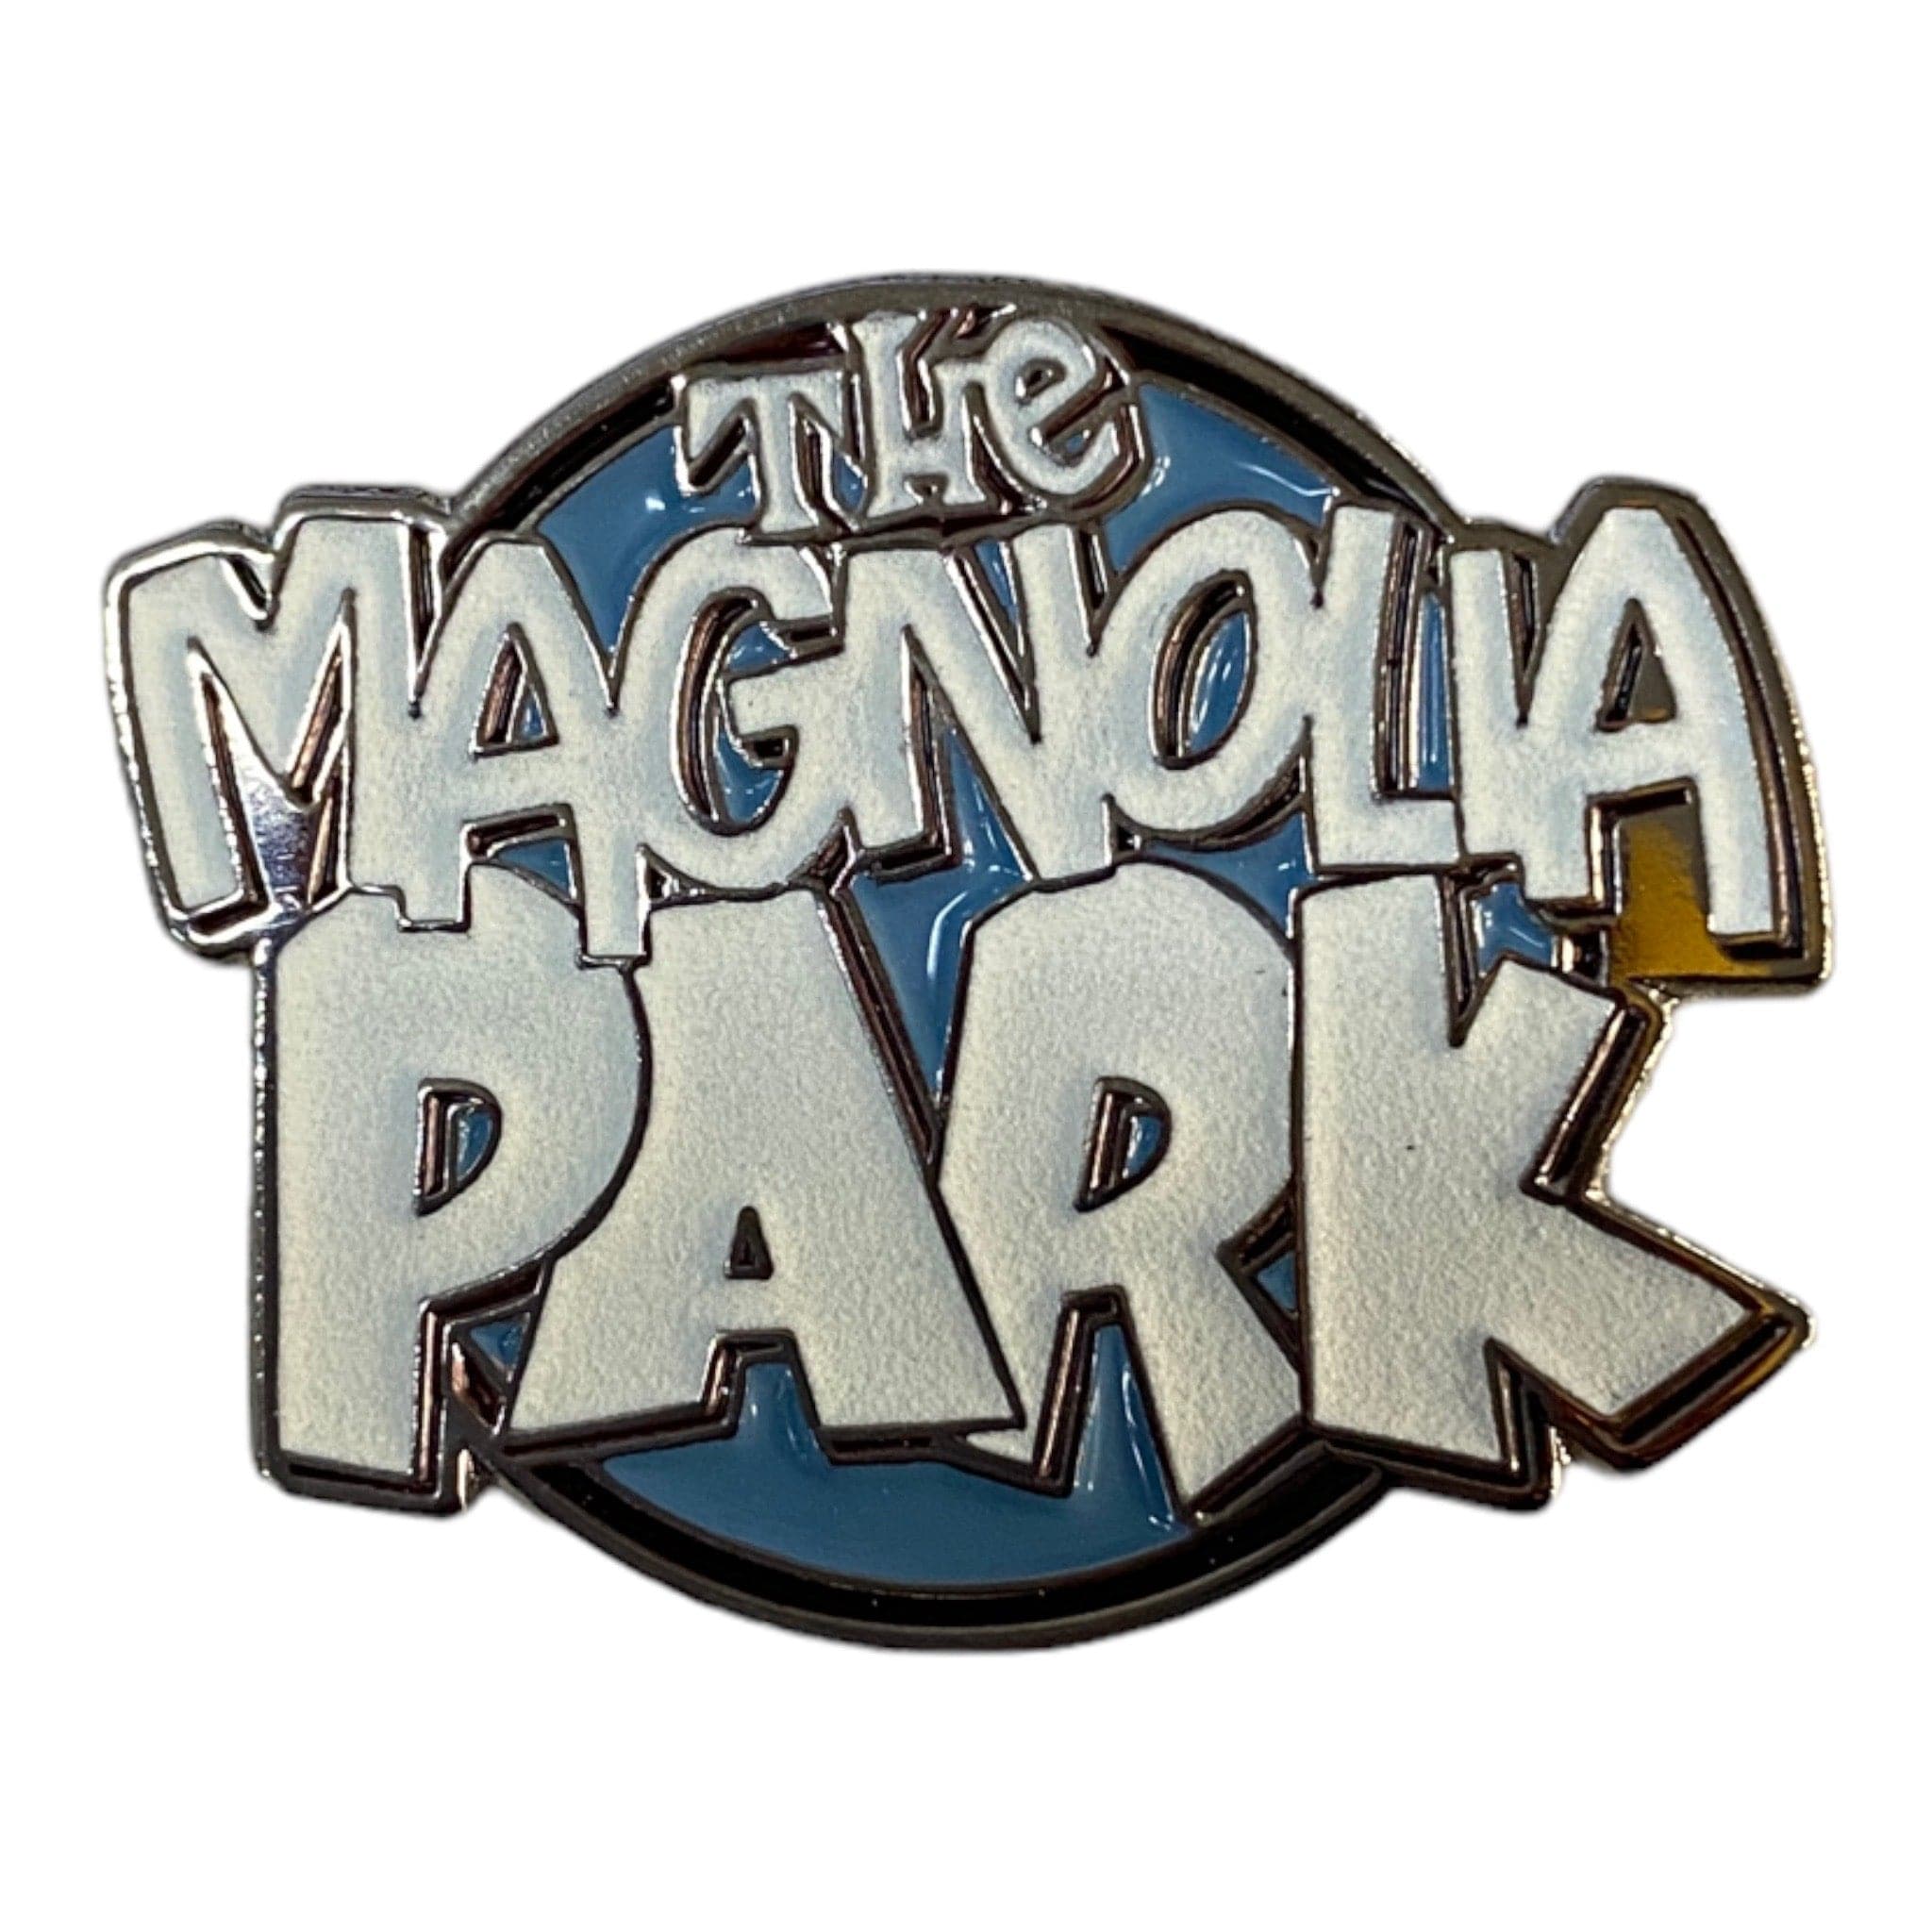 THE MAGNOLIA PARK - &quot;SAVED BY THE PARK&quot; HAT PIN - The Magnolia Park